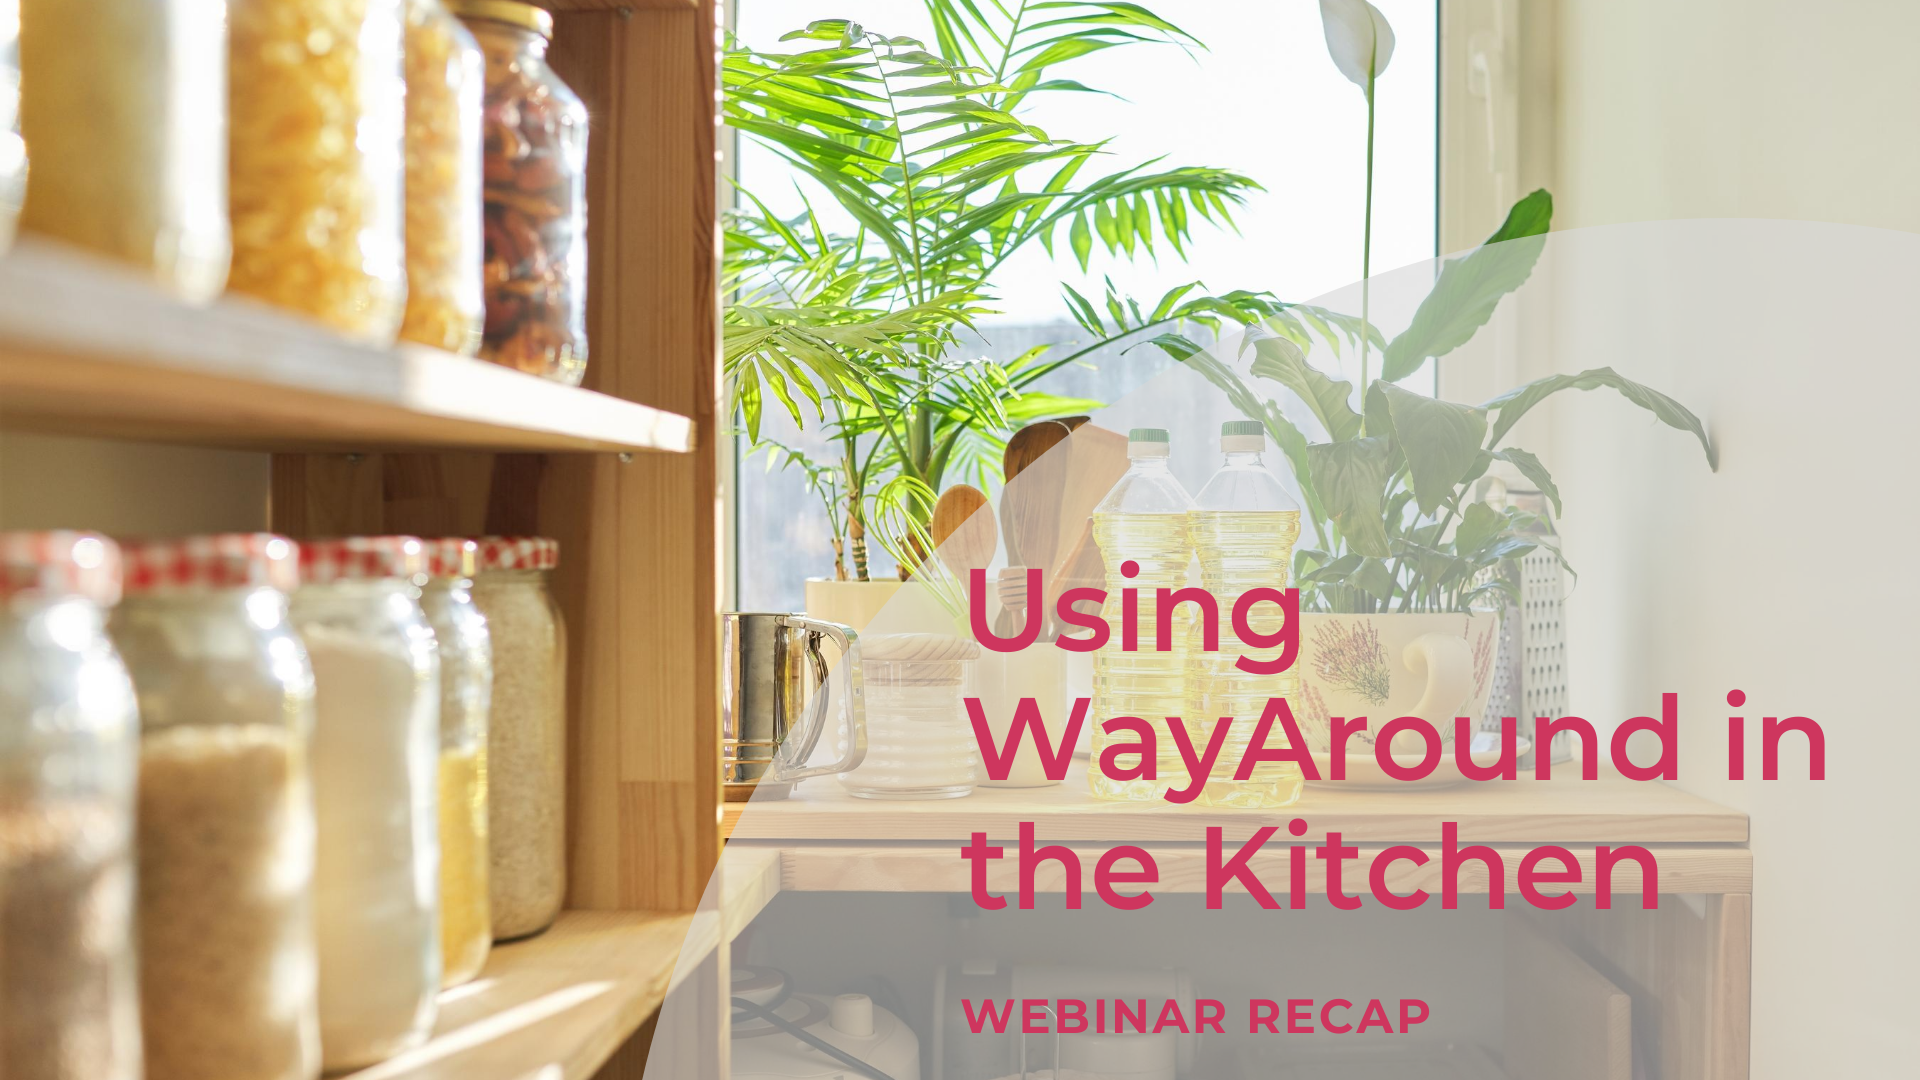 Background photo of jars on wooden shelves with a window. Text says Using WayAround in the Kitchen. Webinar Recap.